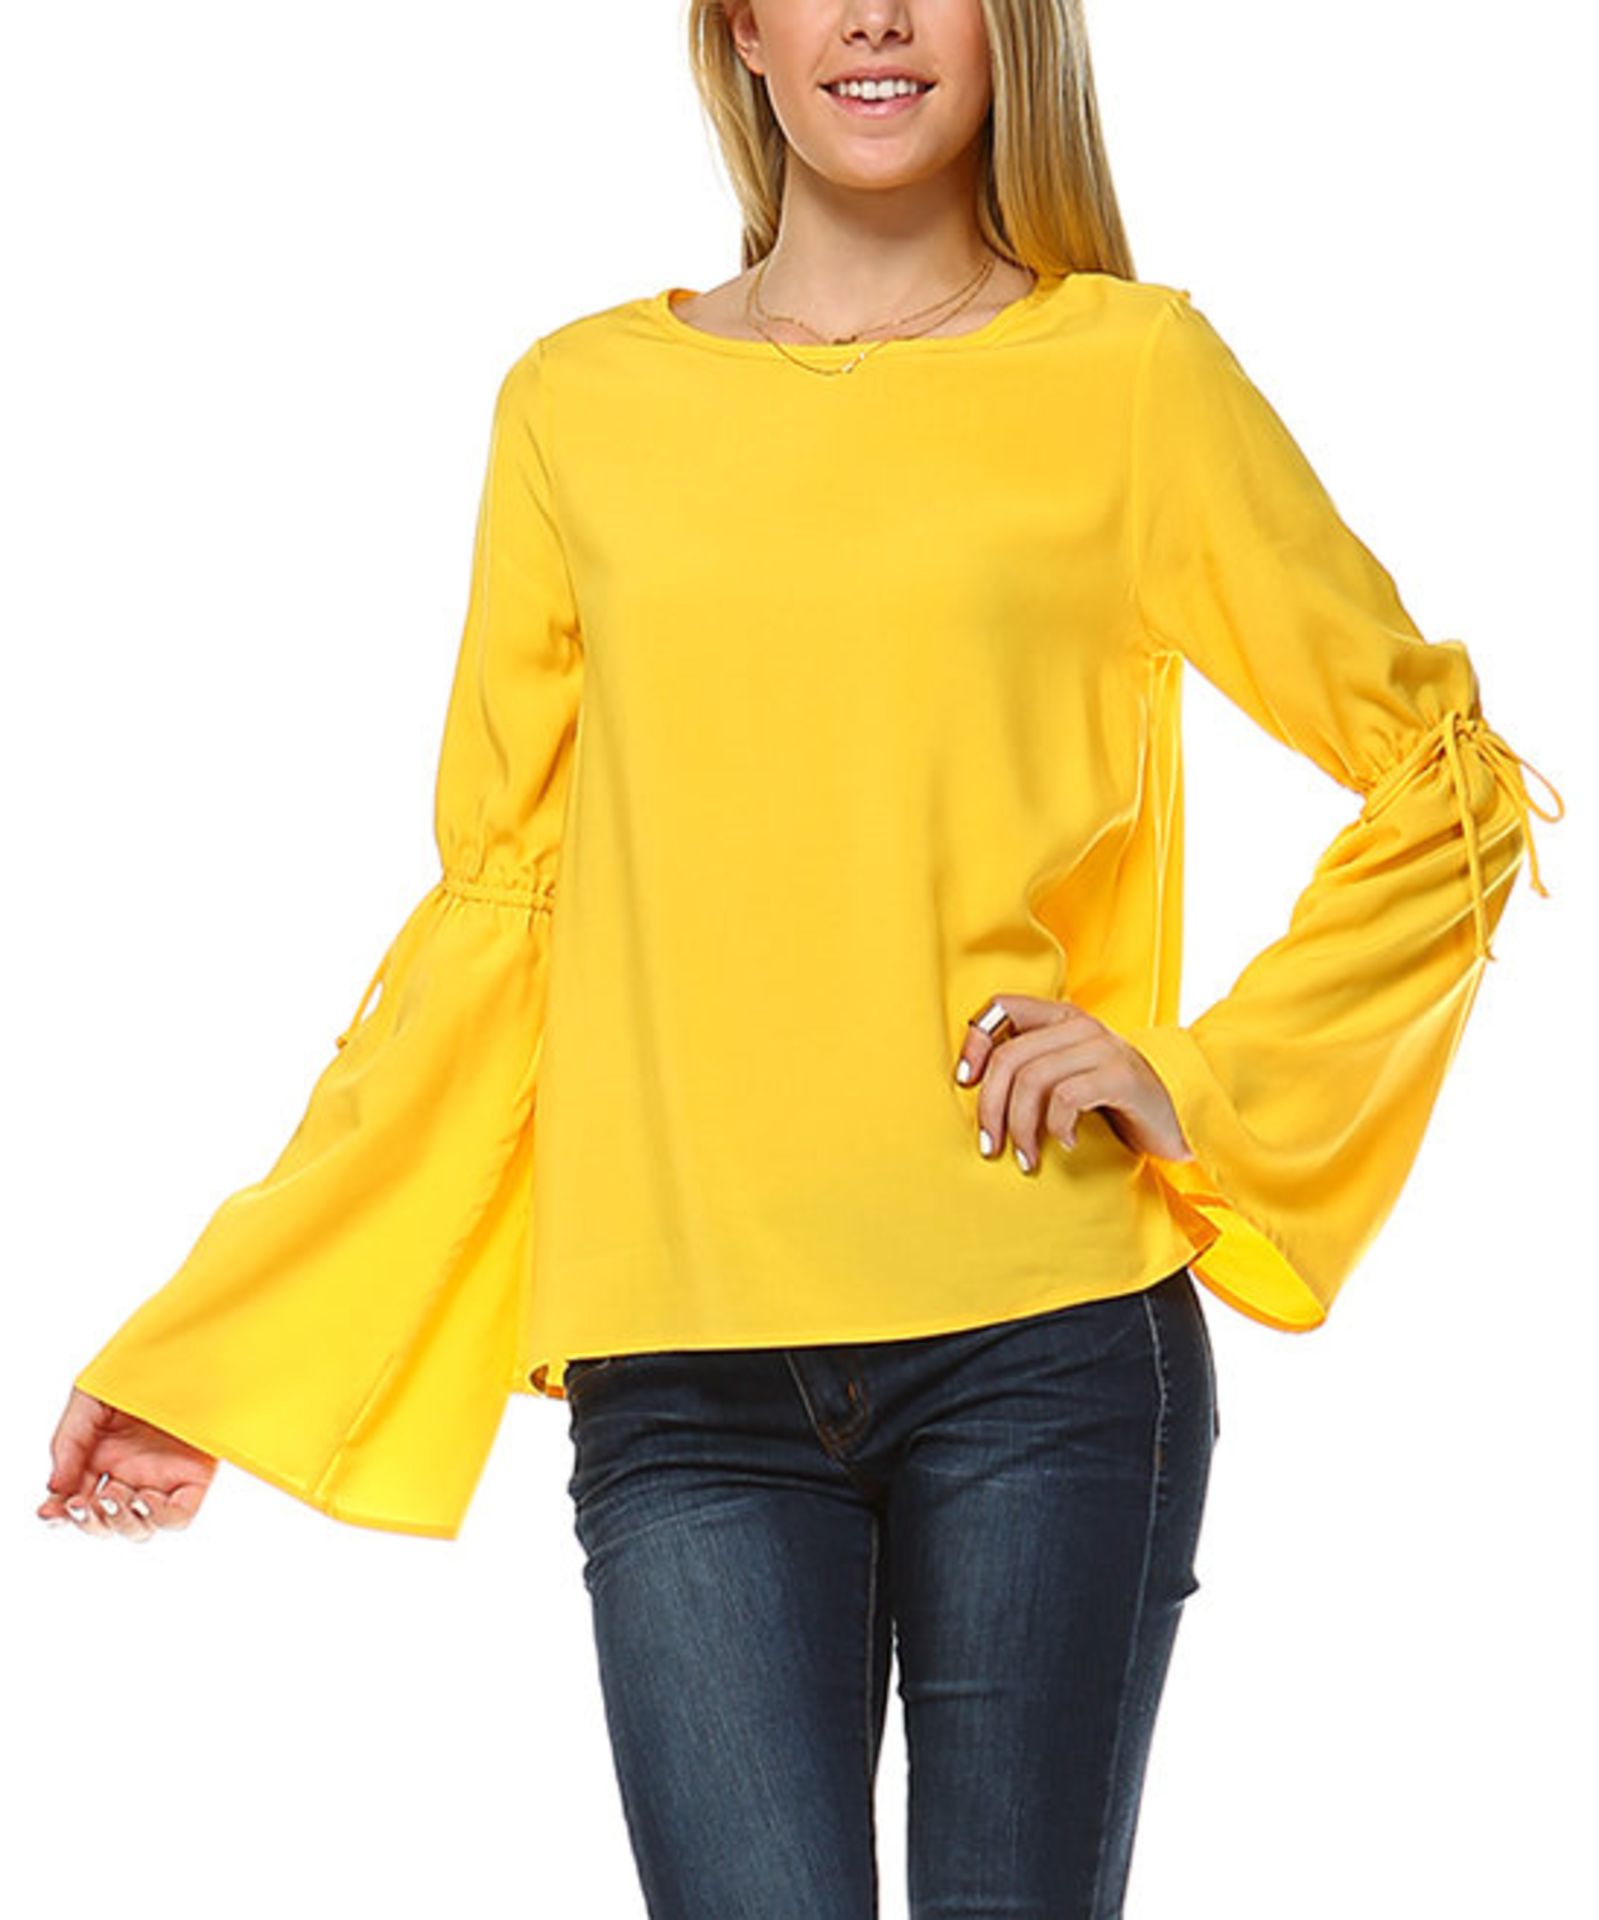 2 Hearts Yellow Trumpet Sleeve Top (Us Size: M ) [Ref: 43423567-1]